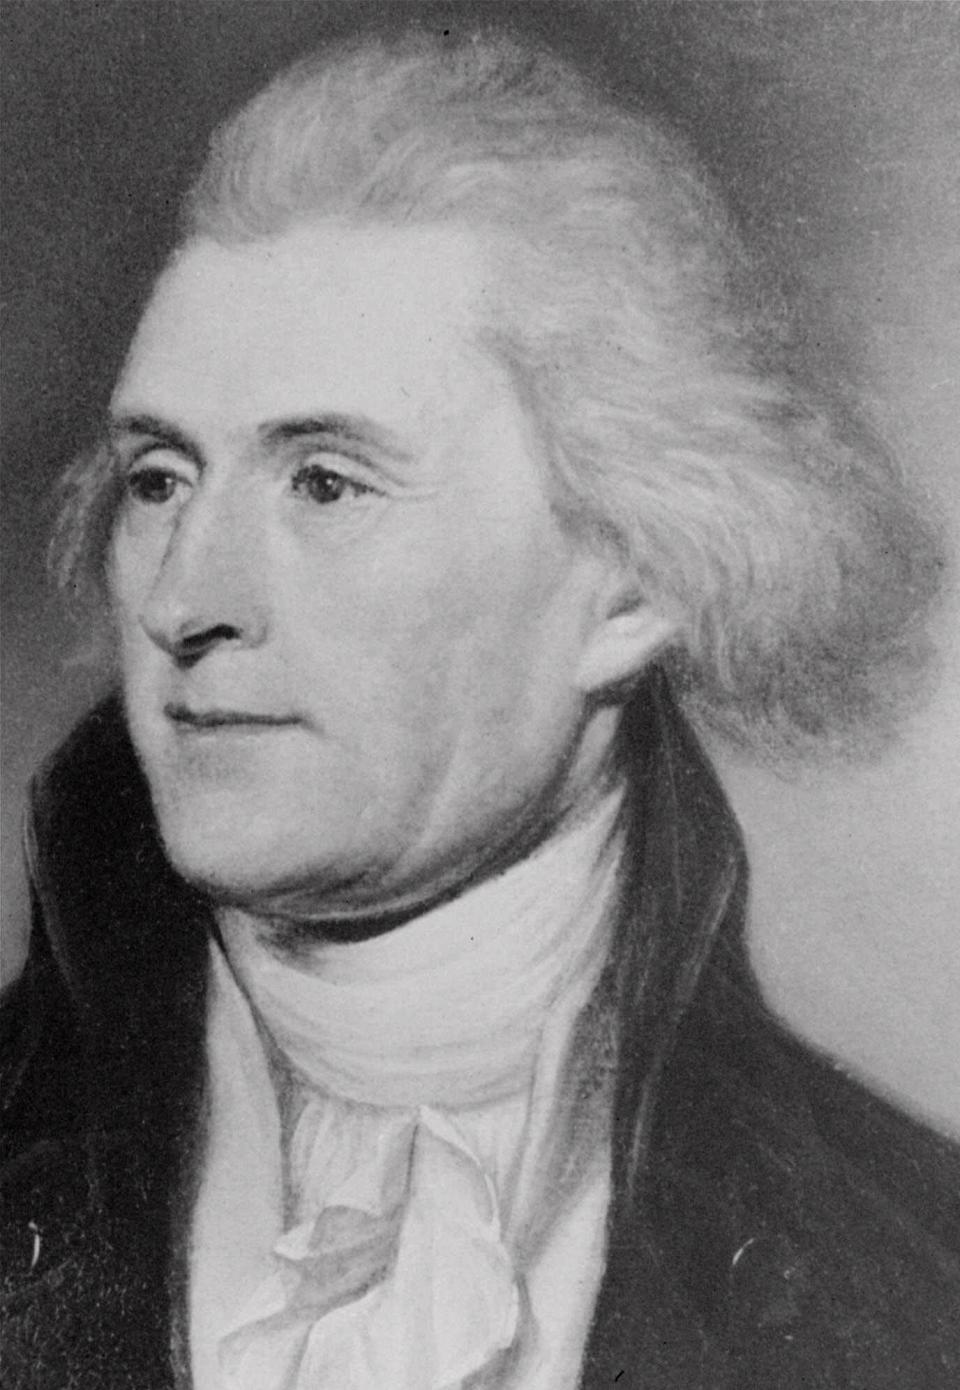 This likeness of Thomas Jefferson by Charles Wilson Peale hangs in Philadelphia's Independence Hall, where Jefferson's Declaration of Independence was reported to the Continental Congress June 28, 1776.